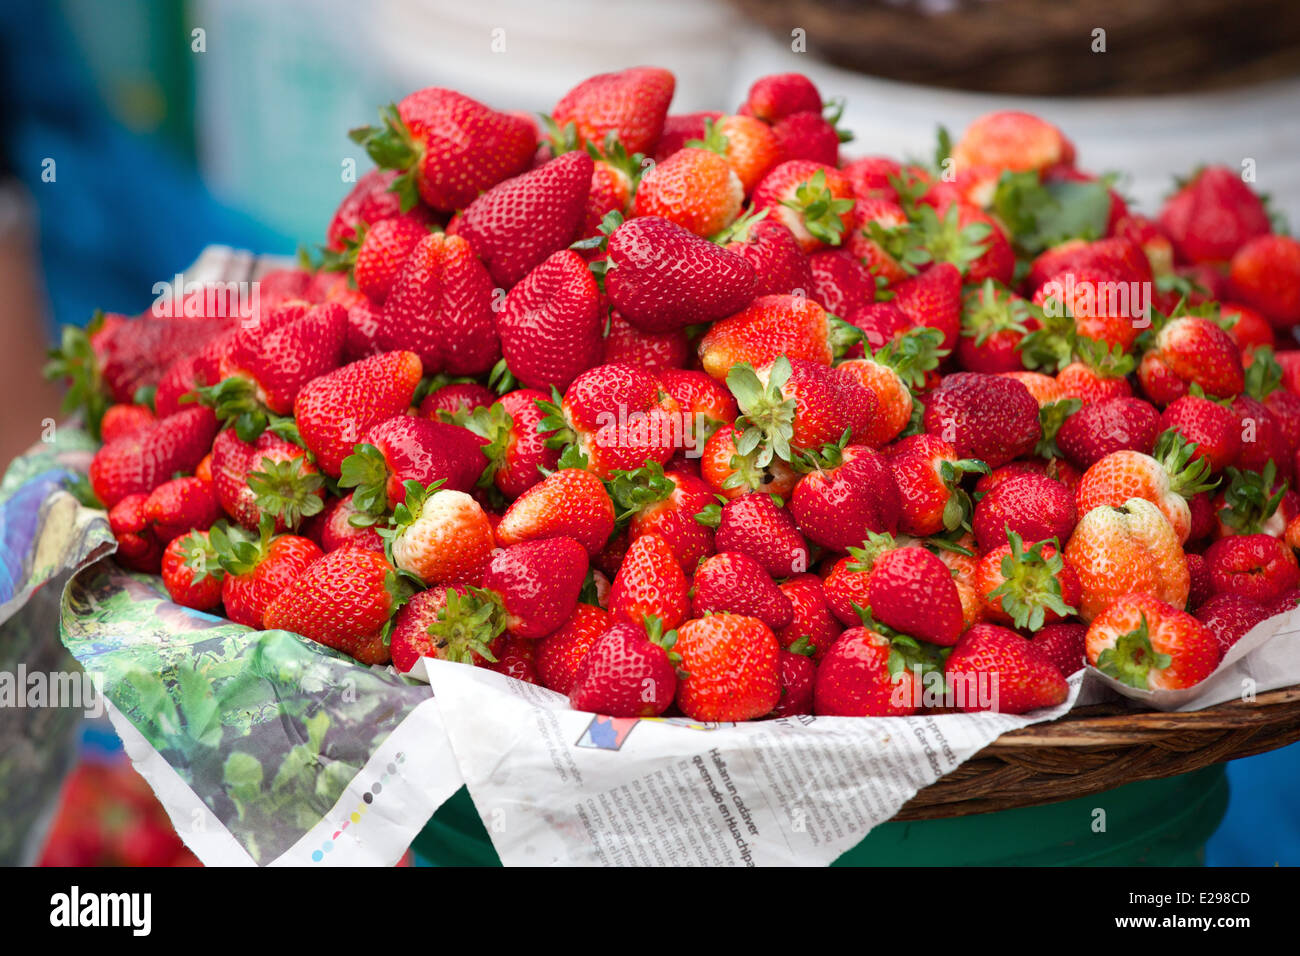 Strawberries for sale at the vegetable market in Cusco, Peru, the ancient seat of the Inca Empire high in the Andes. Stock Photo